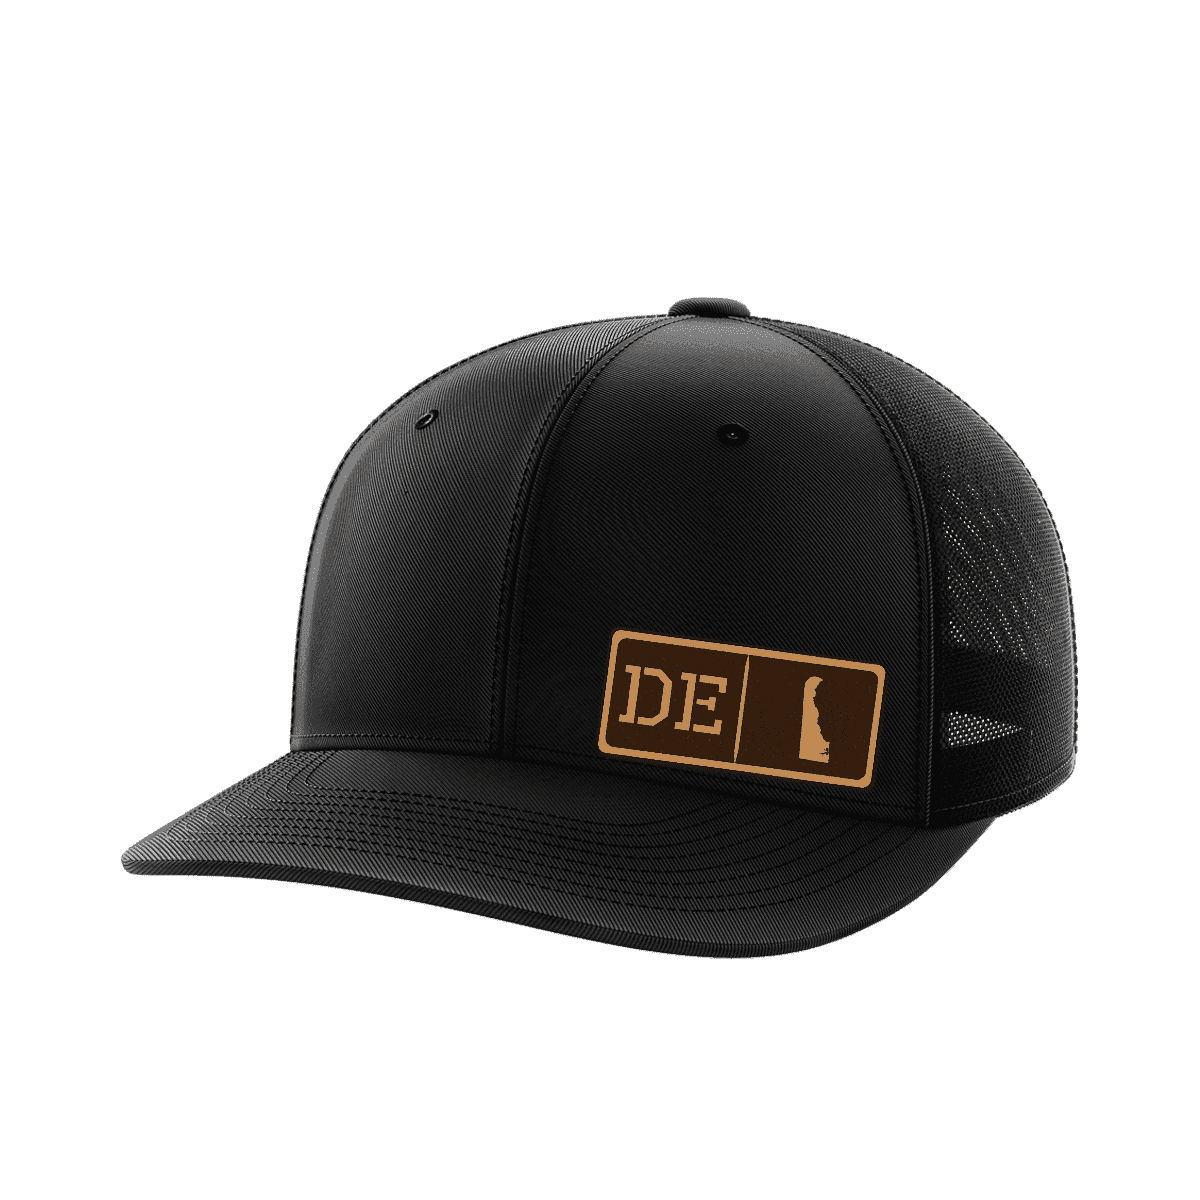 Delaware Homegrown Hats - Greater Half